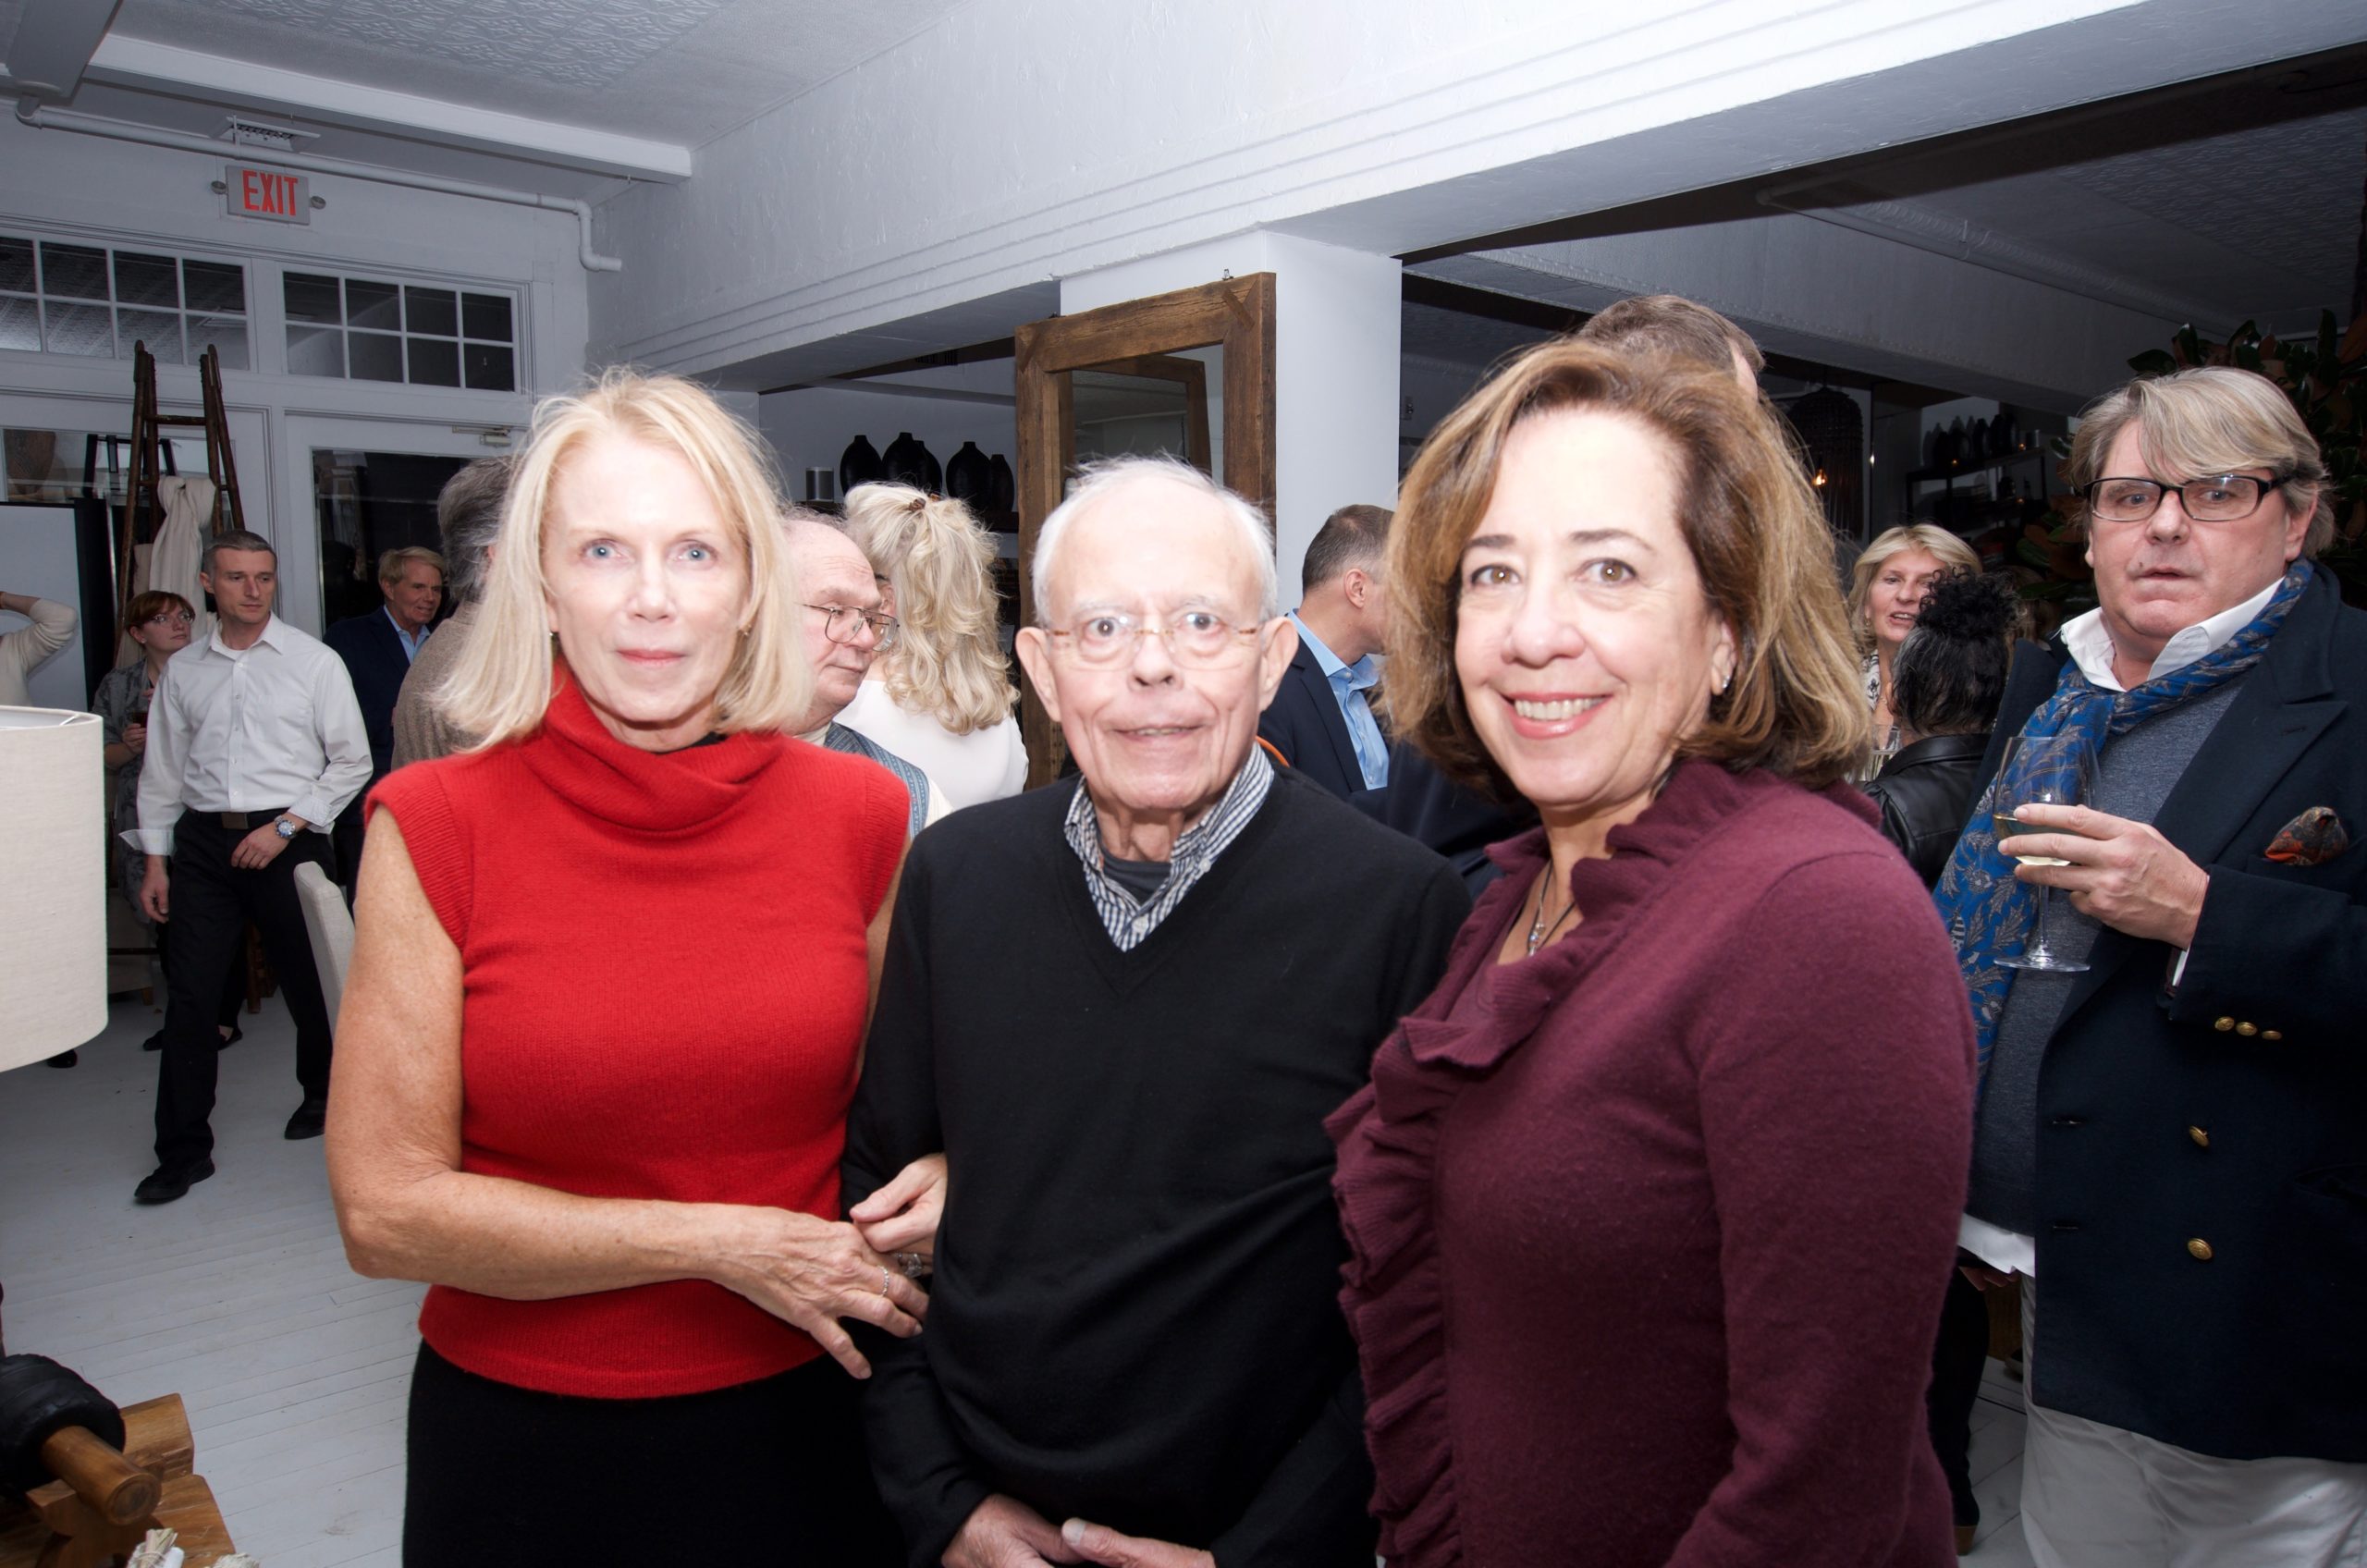 CTREE, the Center for Therapeutic Riding of the East End, celebrated a decade of serving the East End special needs community with an anniversary party at Tutto Il Giorno in Sag Harbo on November 20. Attendees included, from left, Diane McCarron, Pete Gelb and Nancy Grady.